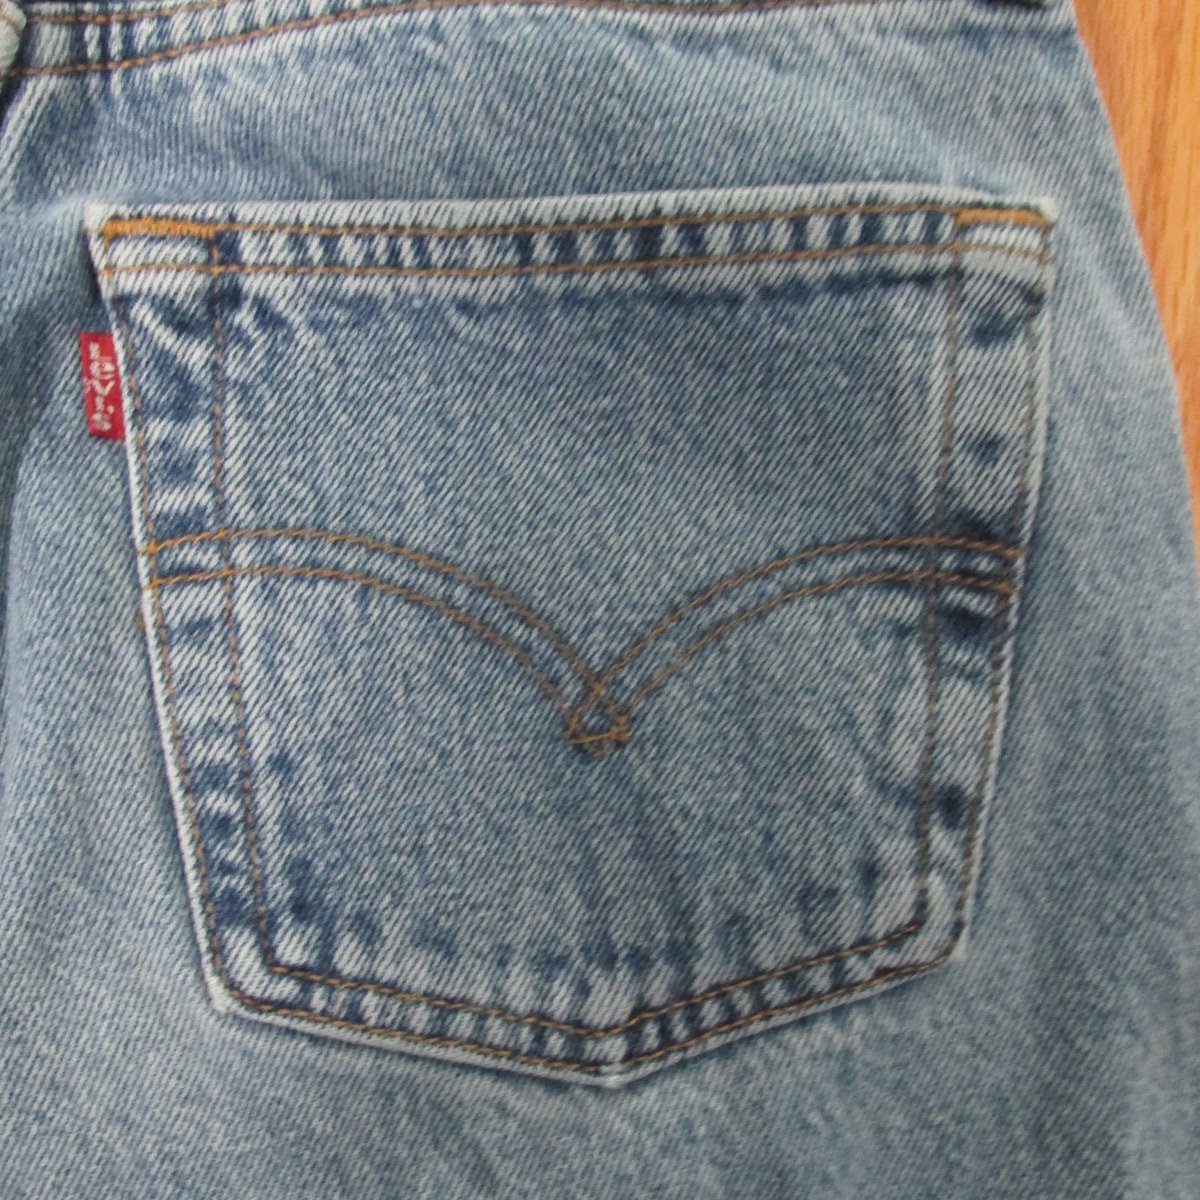 LEVI'S 501 WOMEN'S JUNIOR'S SIZE 25 X 30 JEANS BUTTON FLY STONE WASHED VINTAGE CLASSIC MEN'S